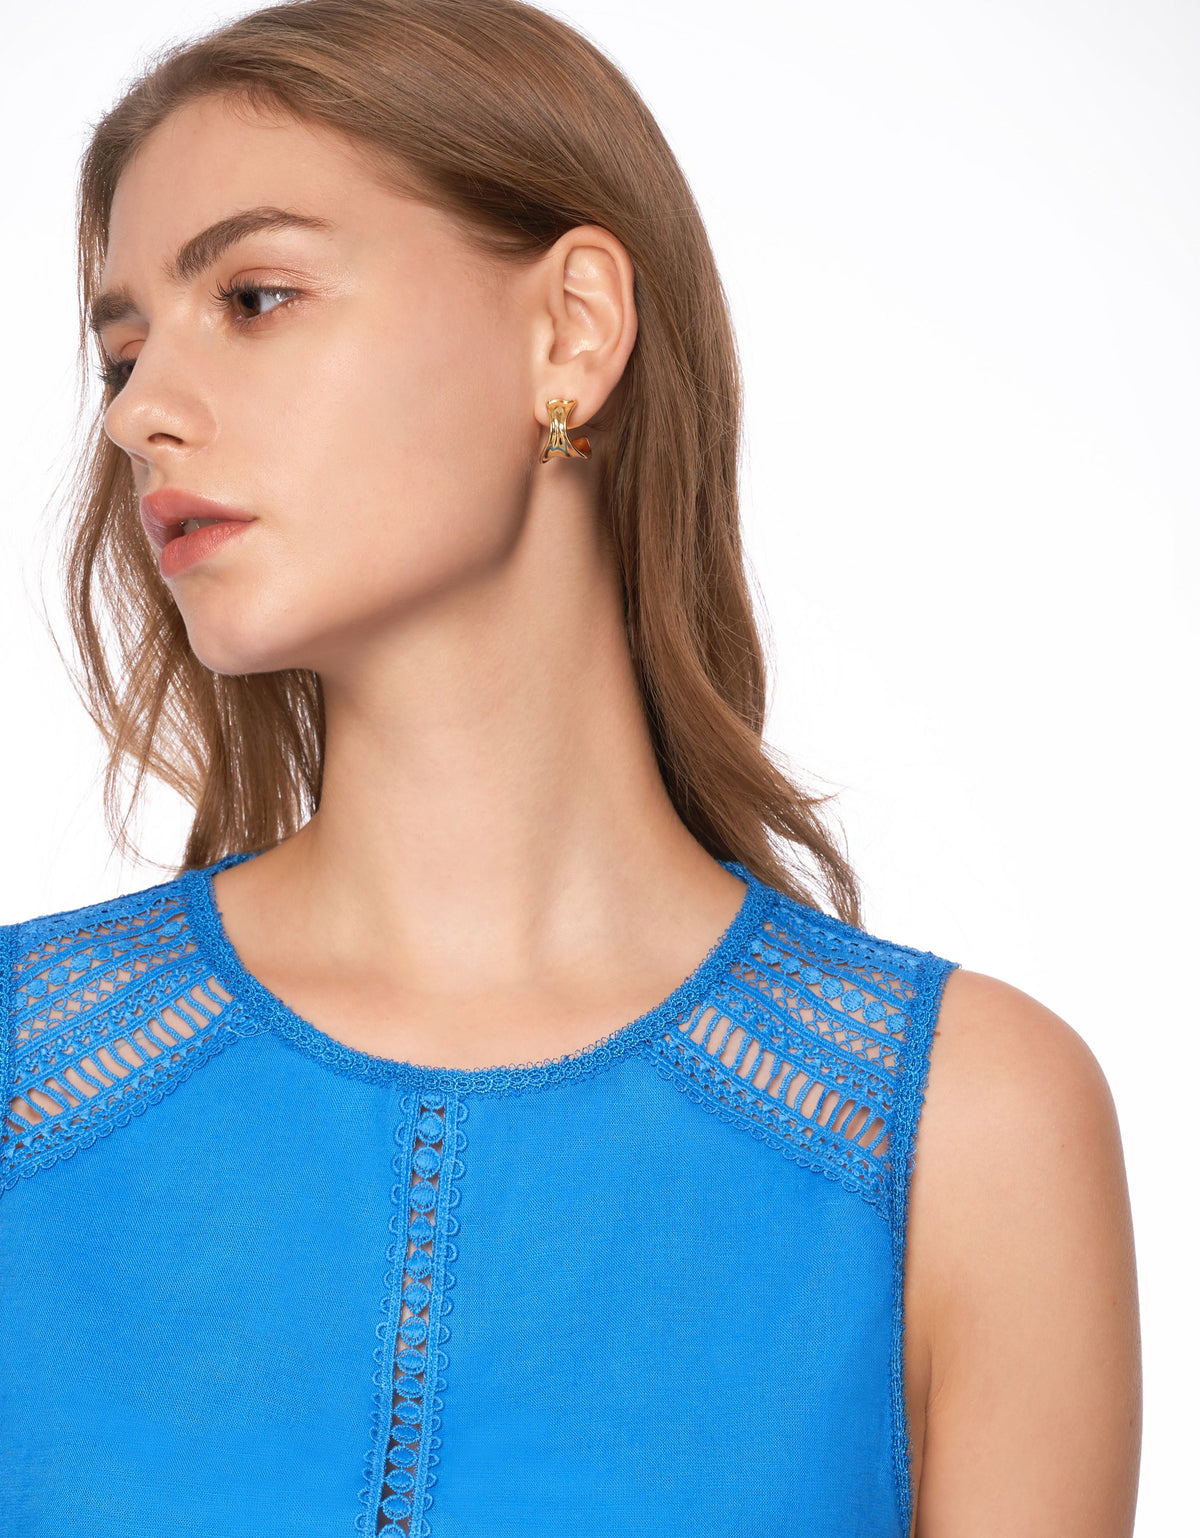 Lace Detail Sleeveless Top